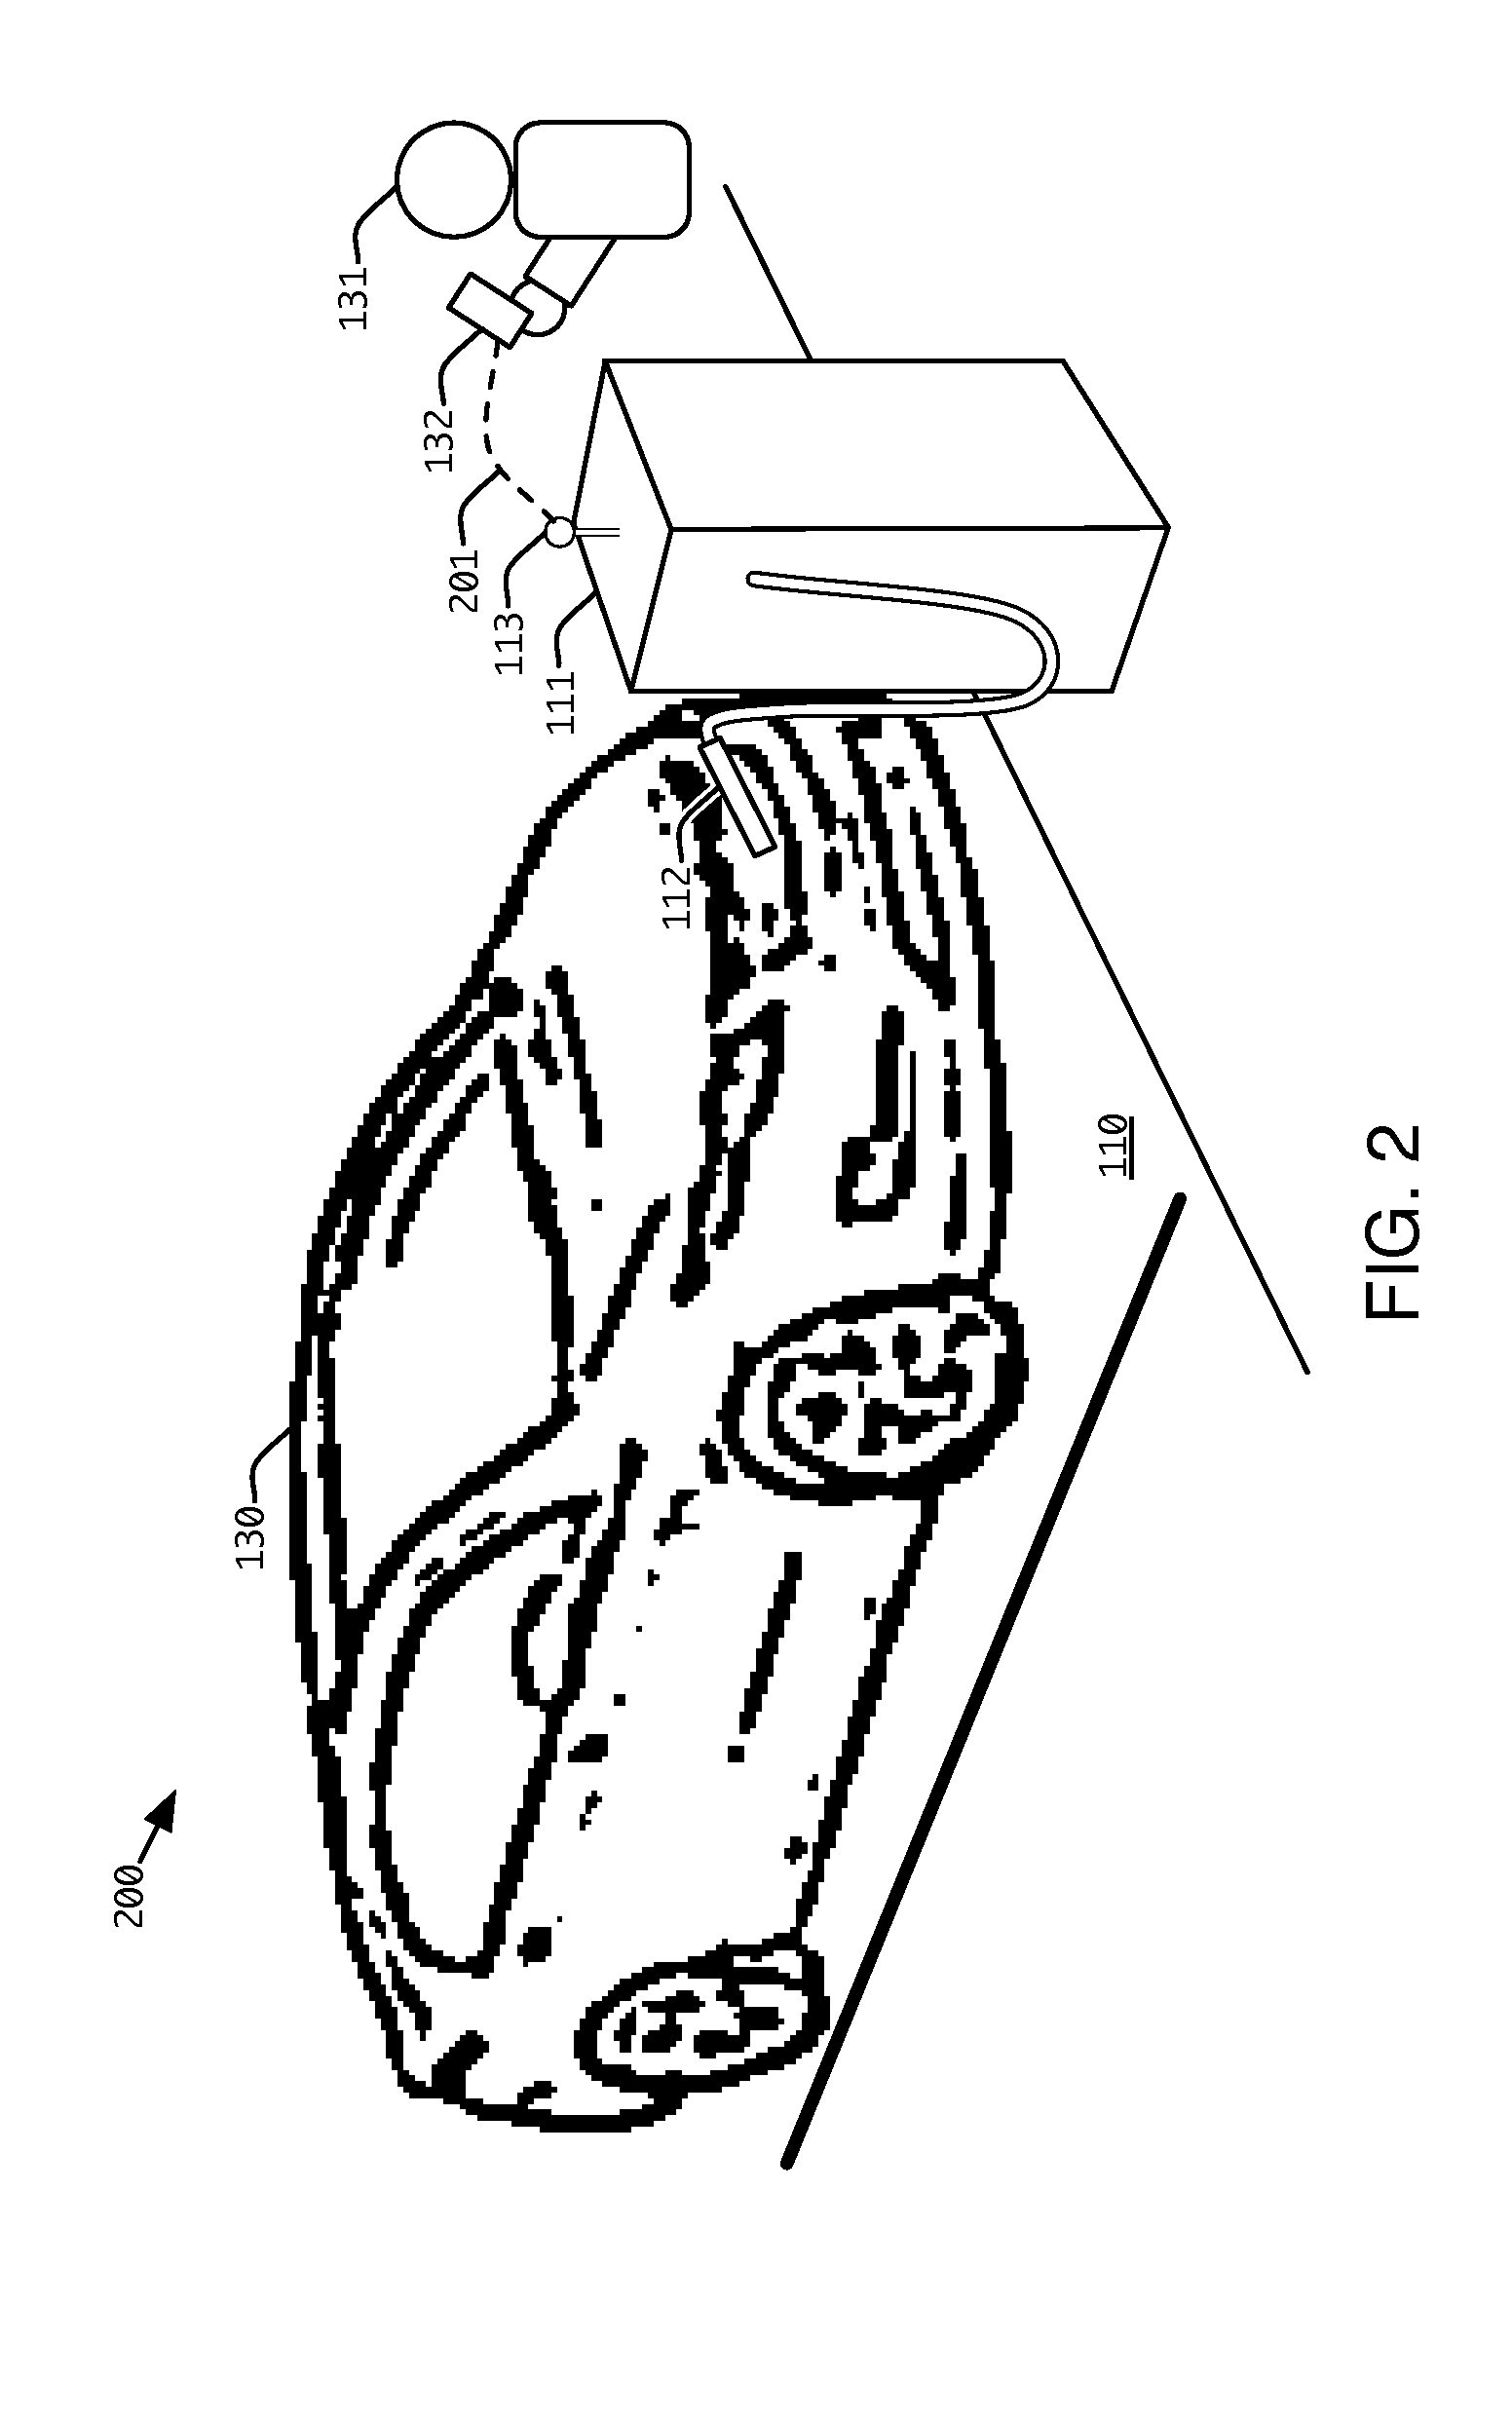 Method and apparatus for finding and accessing a vehicle fueling station, including an electric vehicle charging station